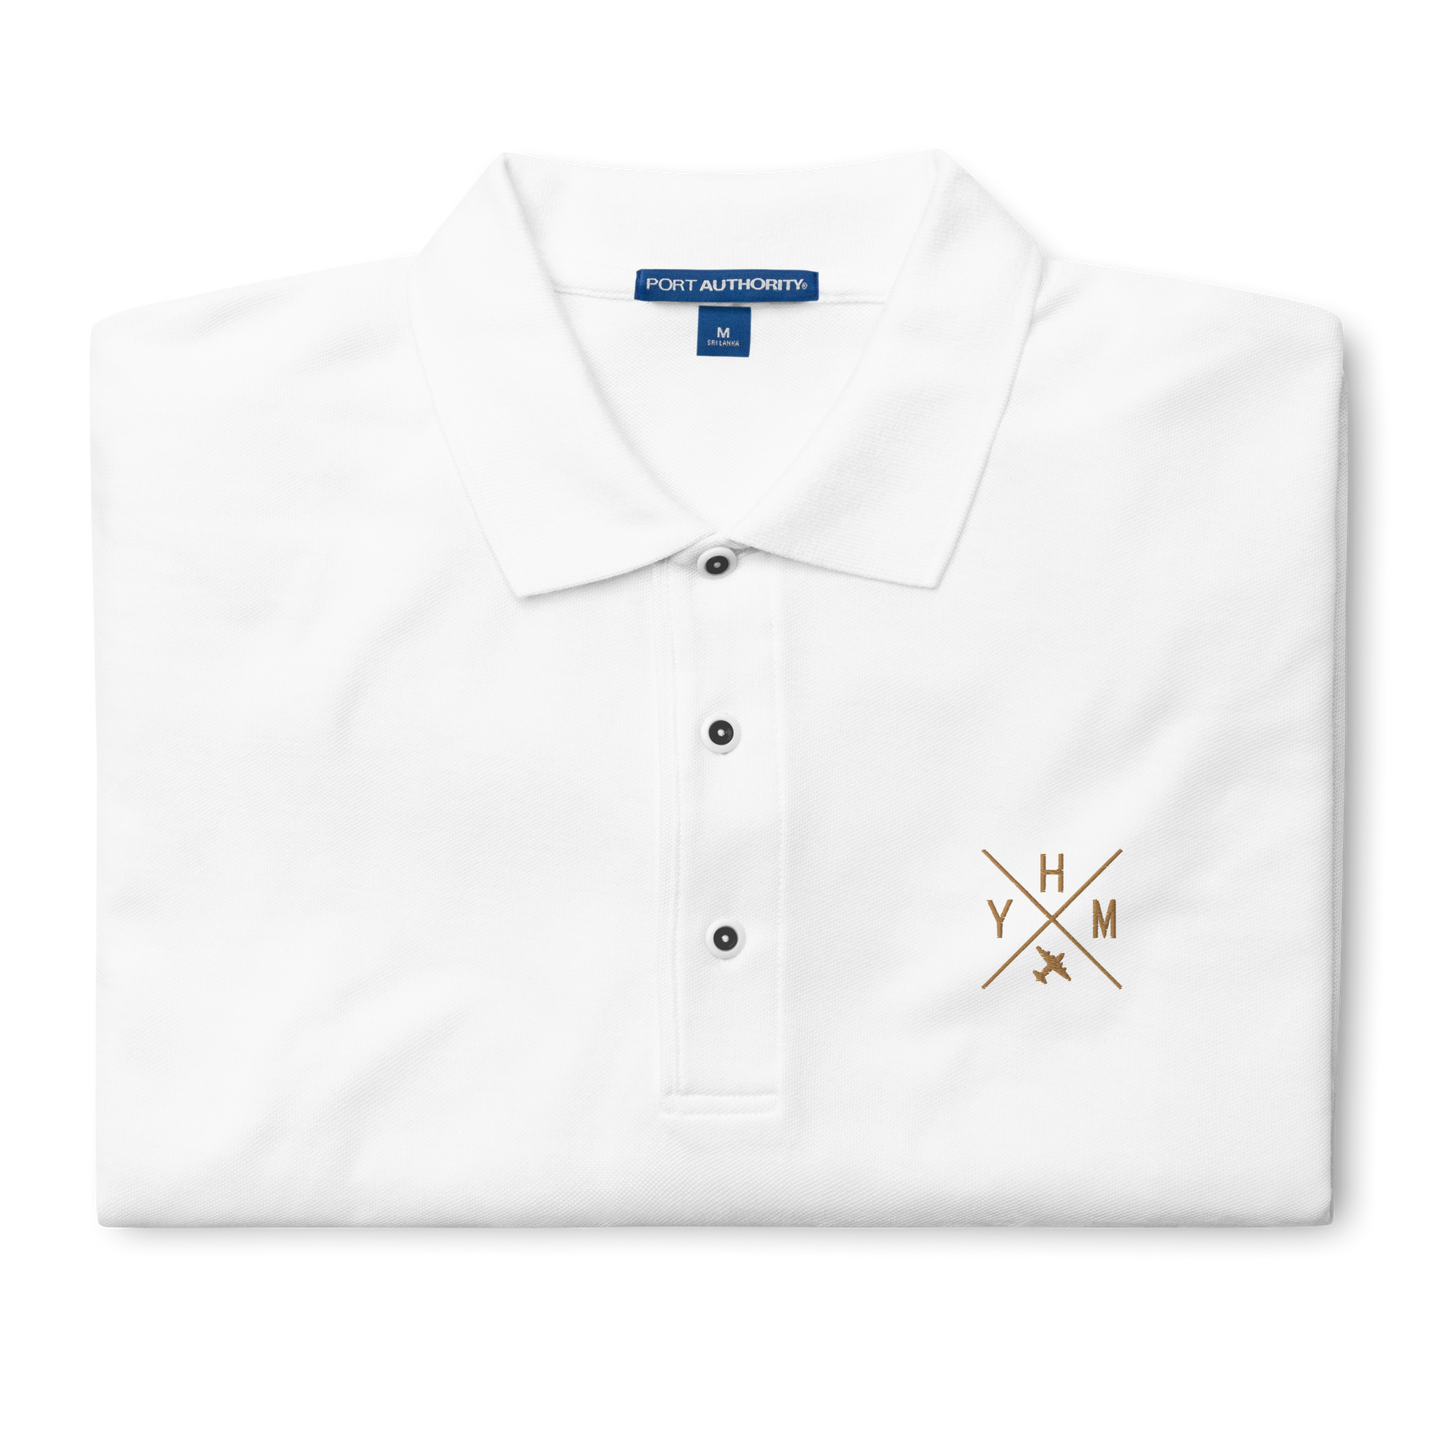 Crossed-X Men's Premium Polo • Old Gold Embroidery